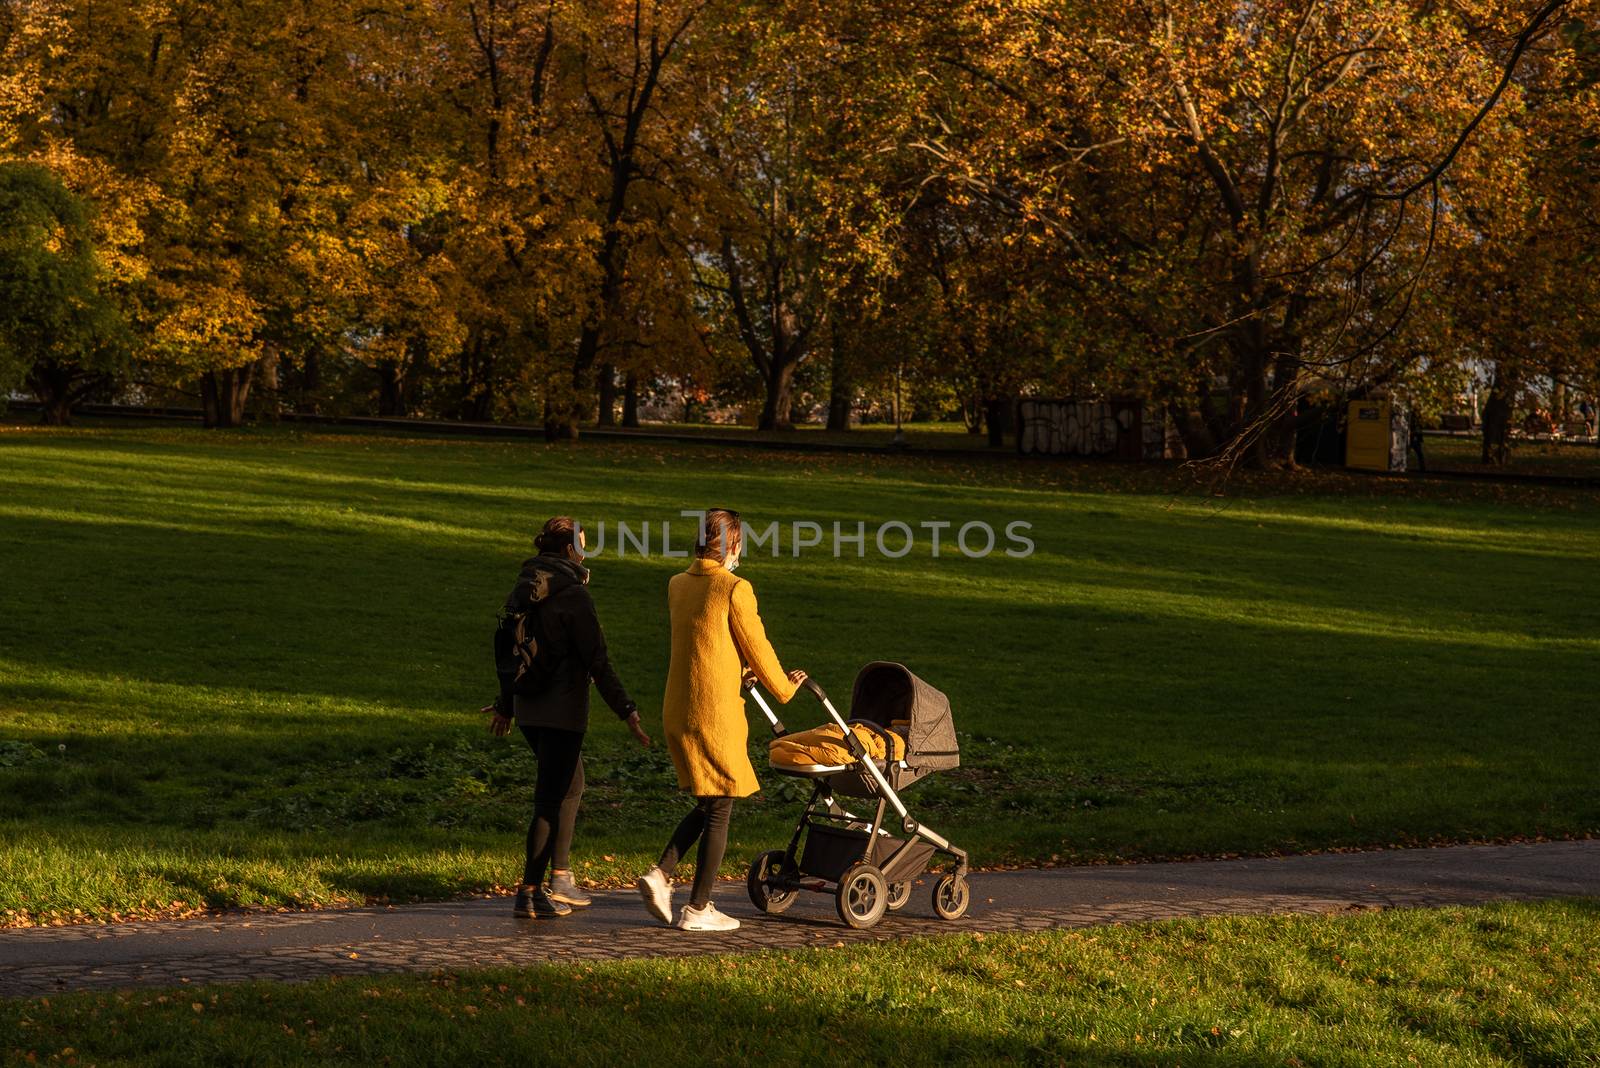 Two woman (one carrying a baby stroll) are enjoying a walk Autumn 2020 on Prague 6, during quarantine period due to outbreak of COVID-19 as winter is starting, Czech Republic